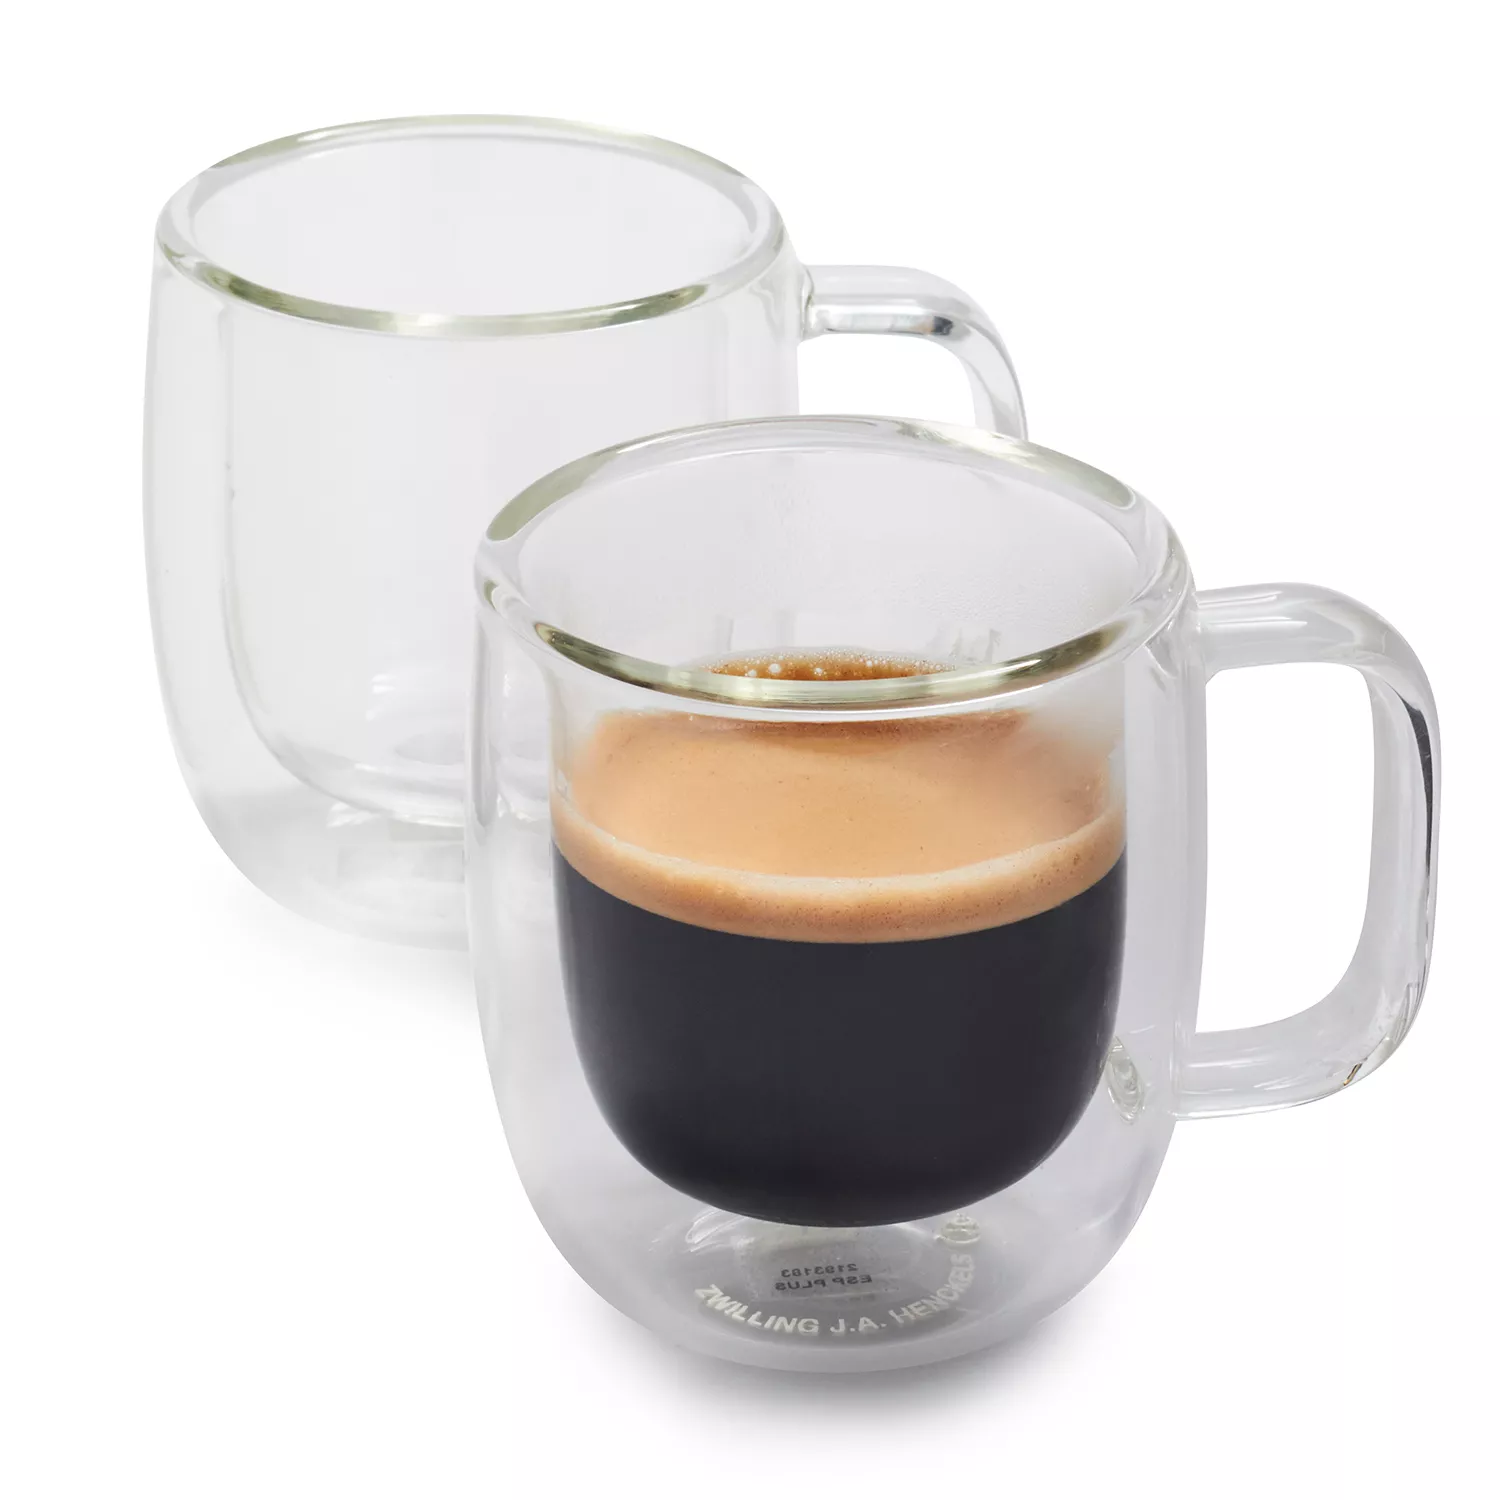 Zwilling J.A. Henckels Sorrento Plus Double-Wall Double Espresso Glasses, 4.5 oz., Set of 2